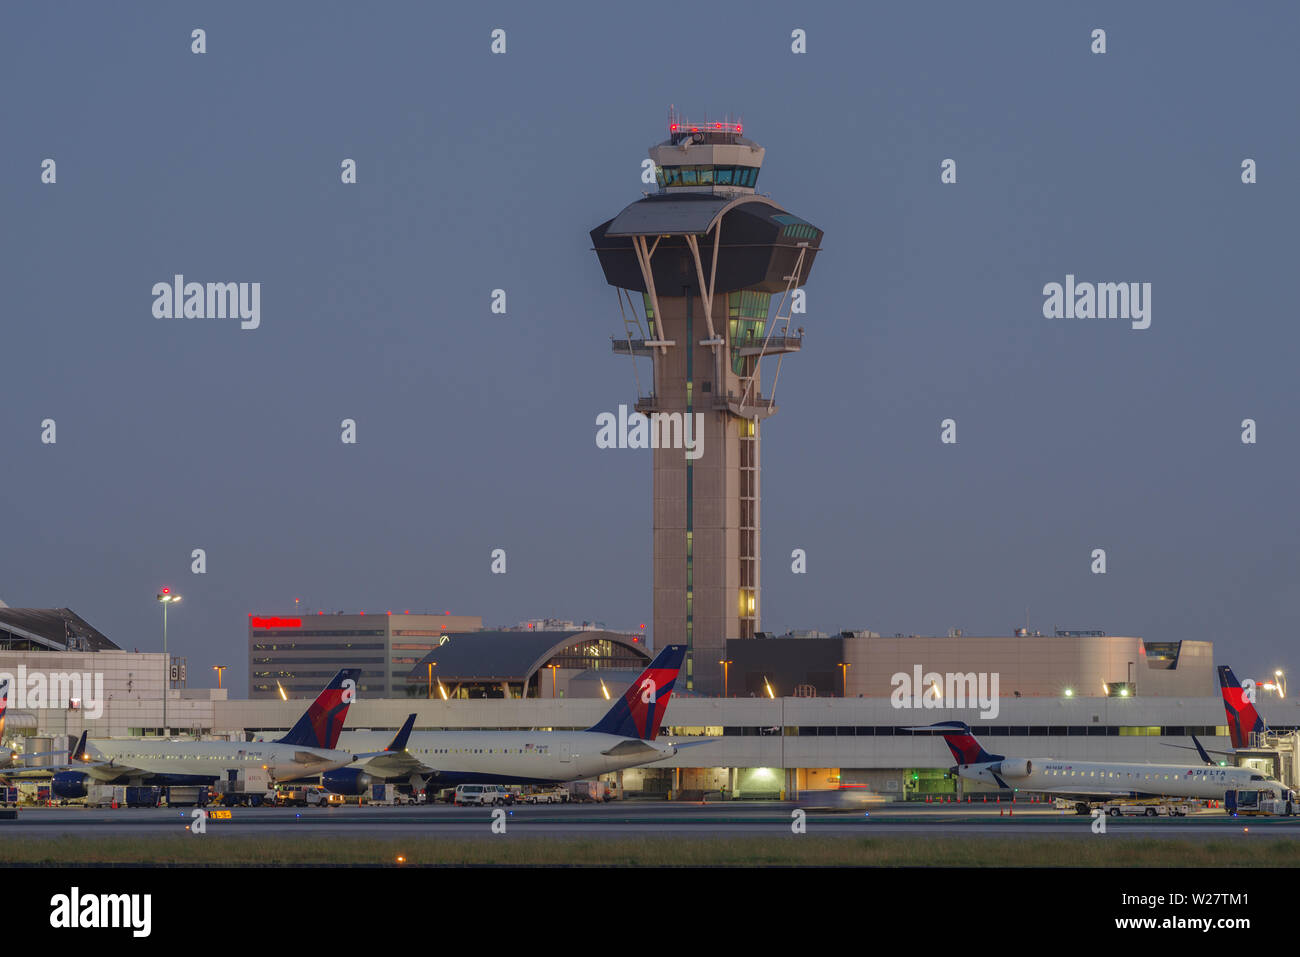 Image of the control tower and Delta Air Lines jets at the gate at the Los Angeles International Airport, LAX, at dusk. Stock Photo